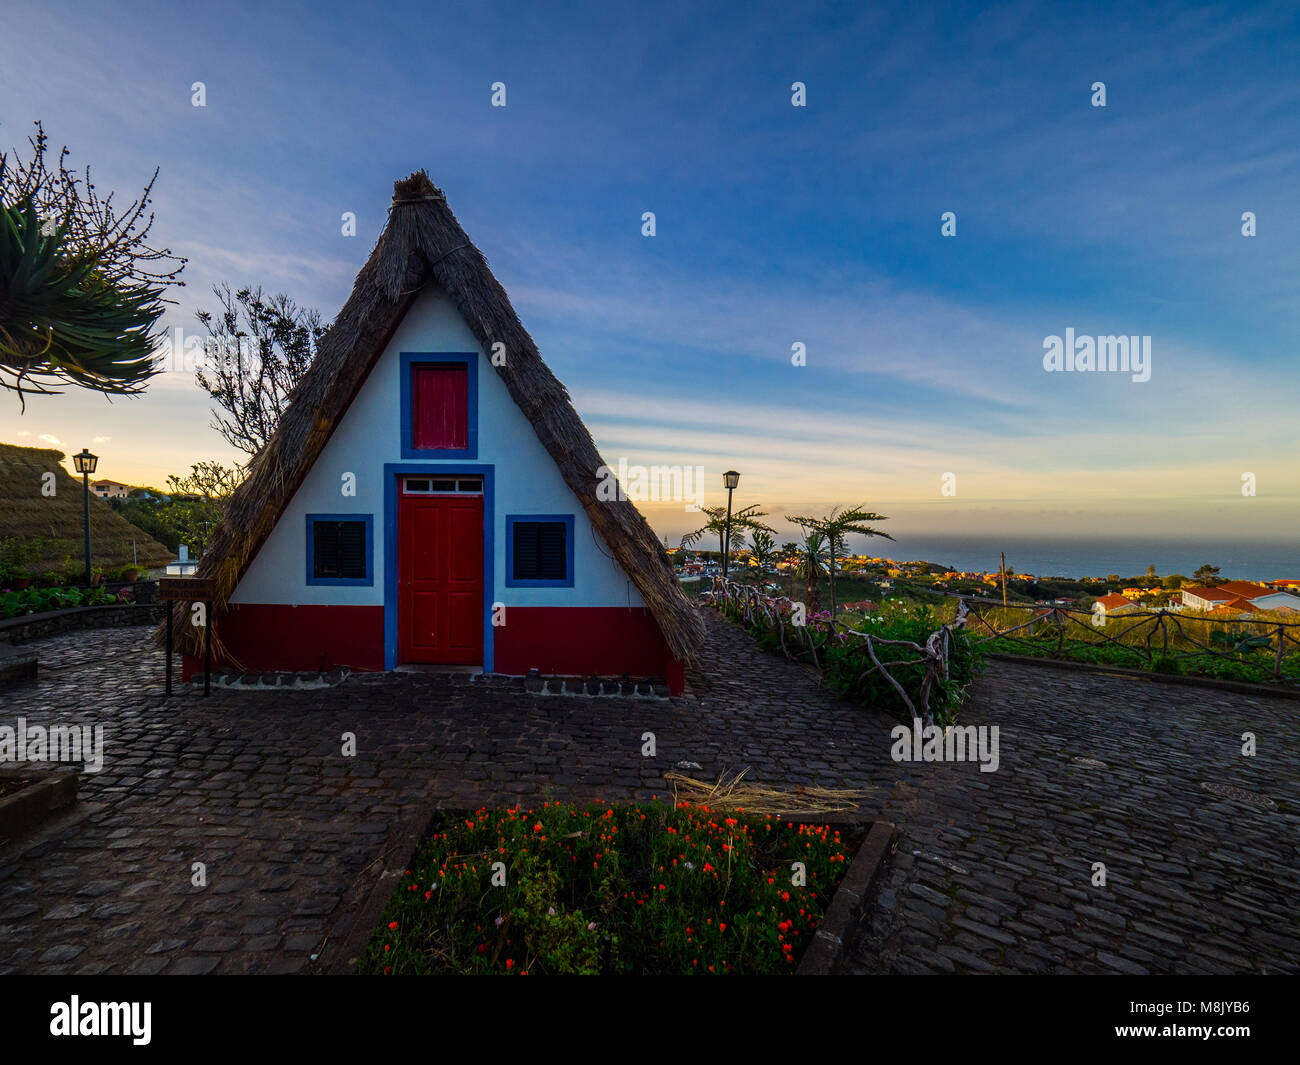 Typical madeiran traditional houses in Santana, Madeira Stock Photo